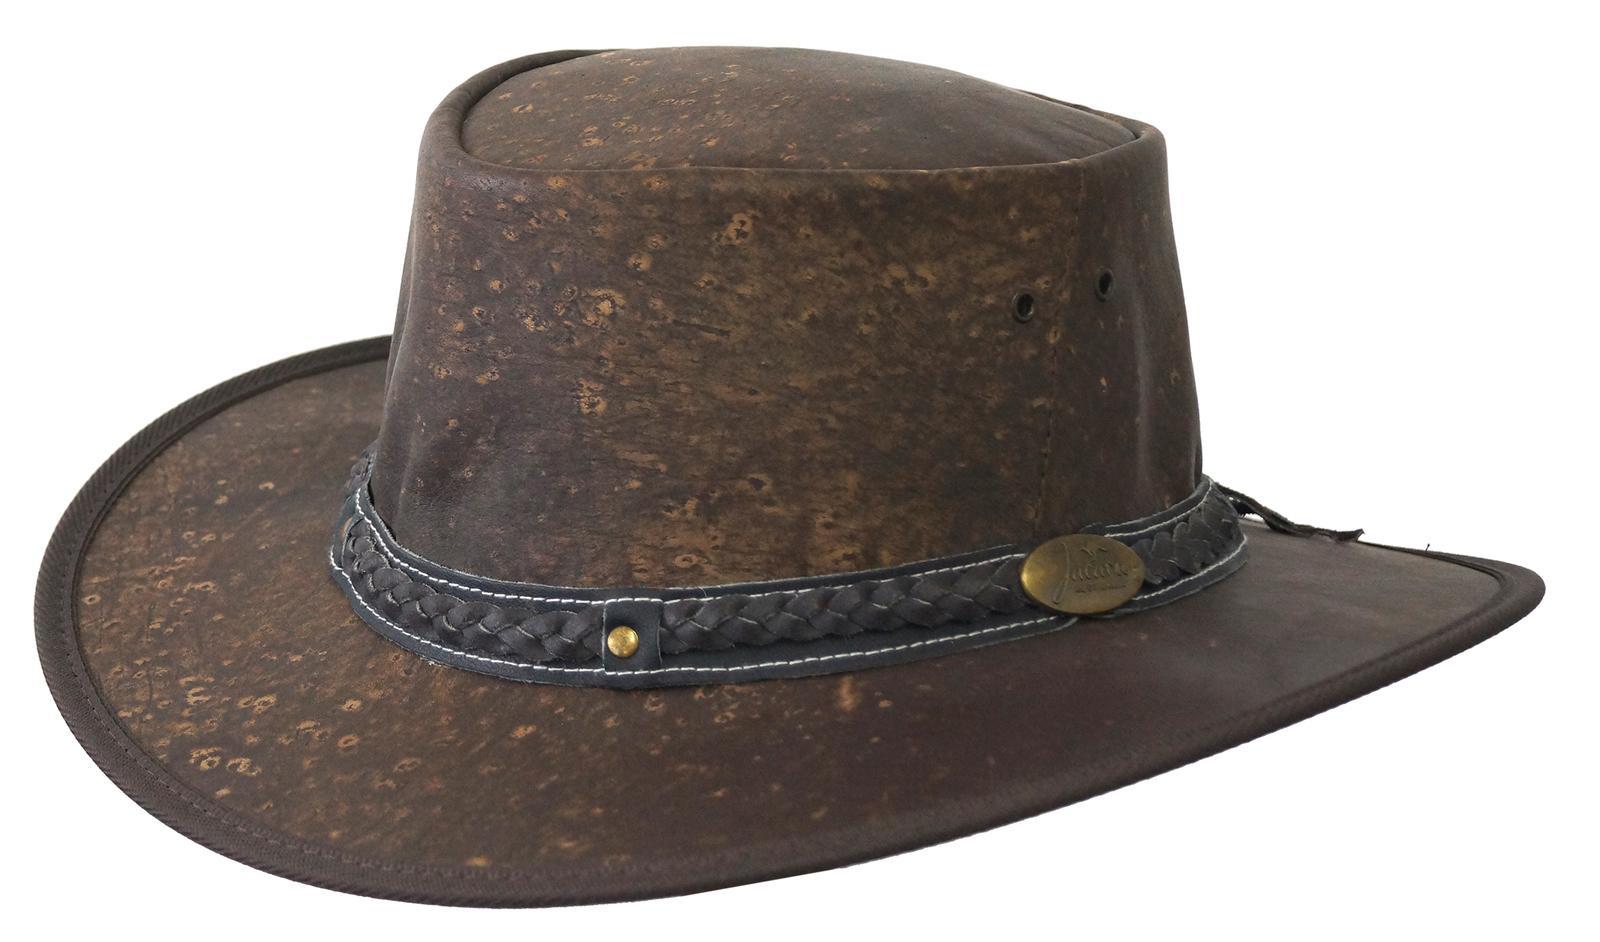 JACARU Squashy Kangaroo Leather Hat Roo Traveller Crushable Travel Outback - Brown - Large